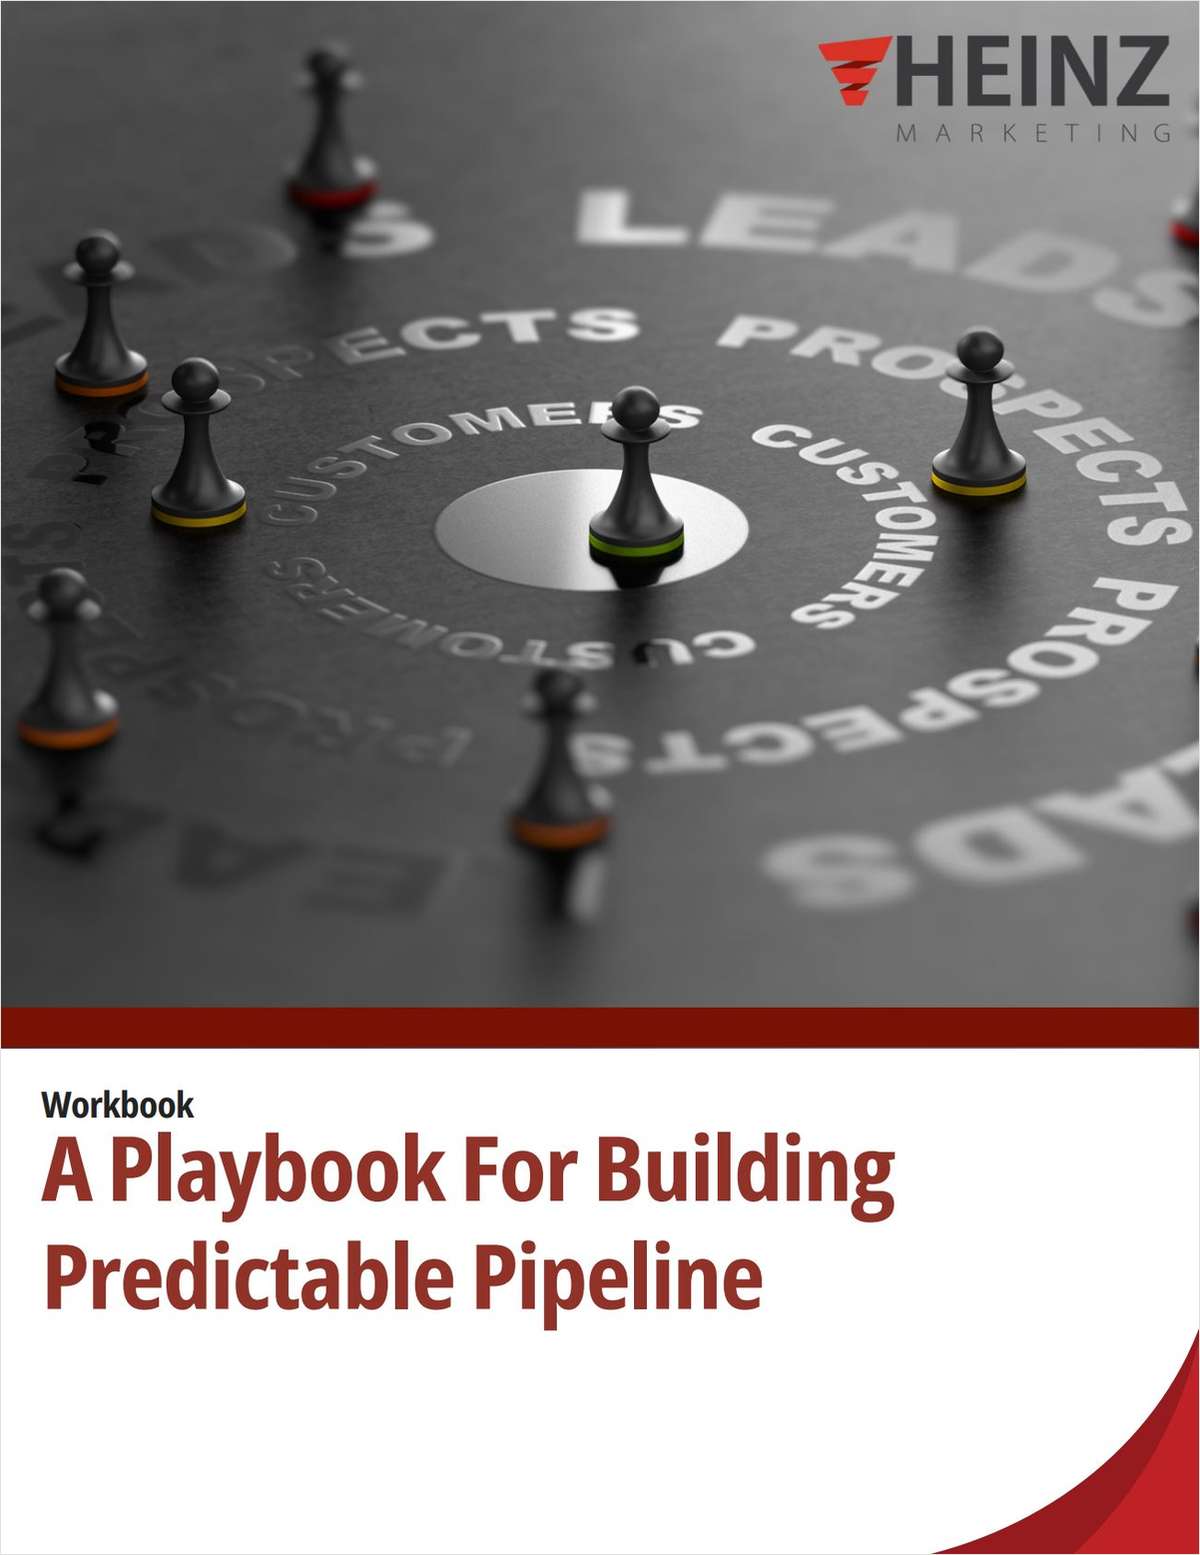 A Playbook for Building Predictable Pipeline